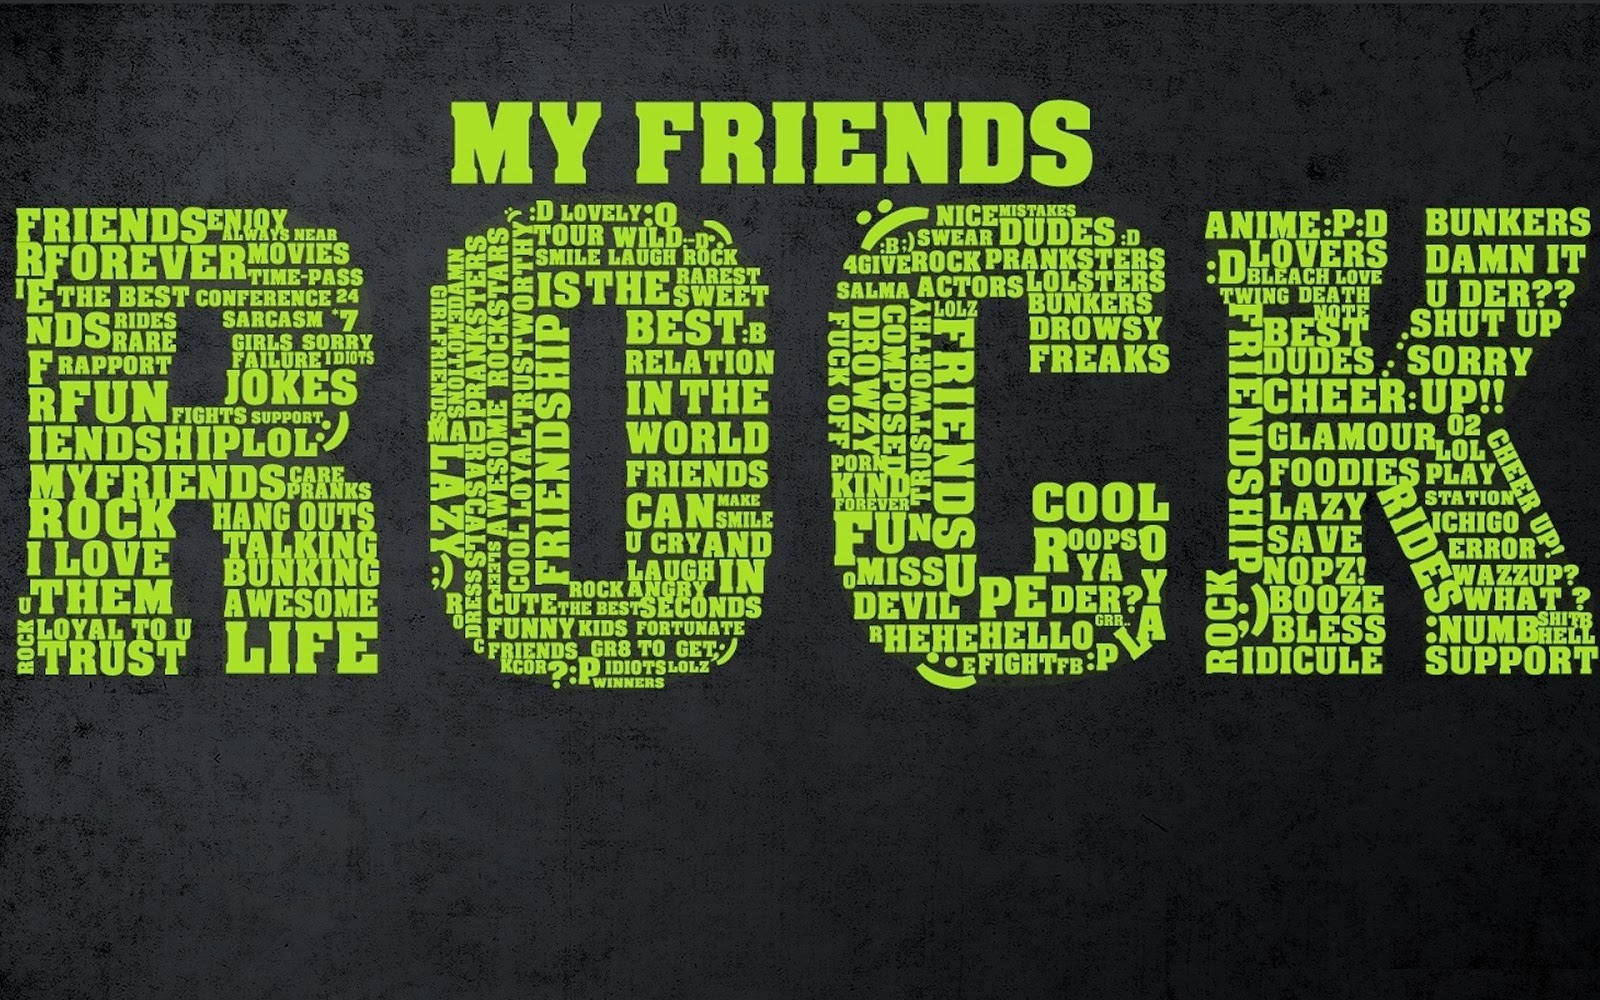 Happy Friendship day 2014 HD Wallpapers Banner Images For Free ...